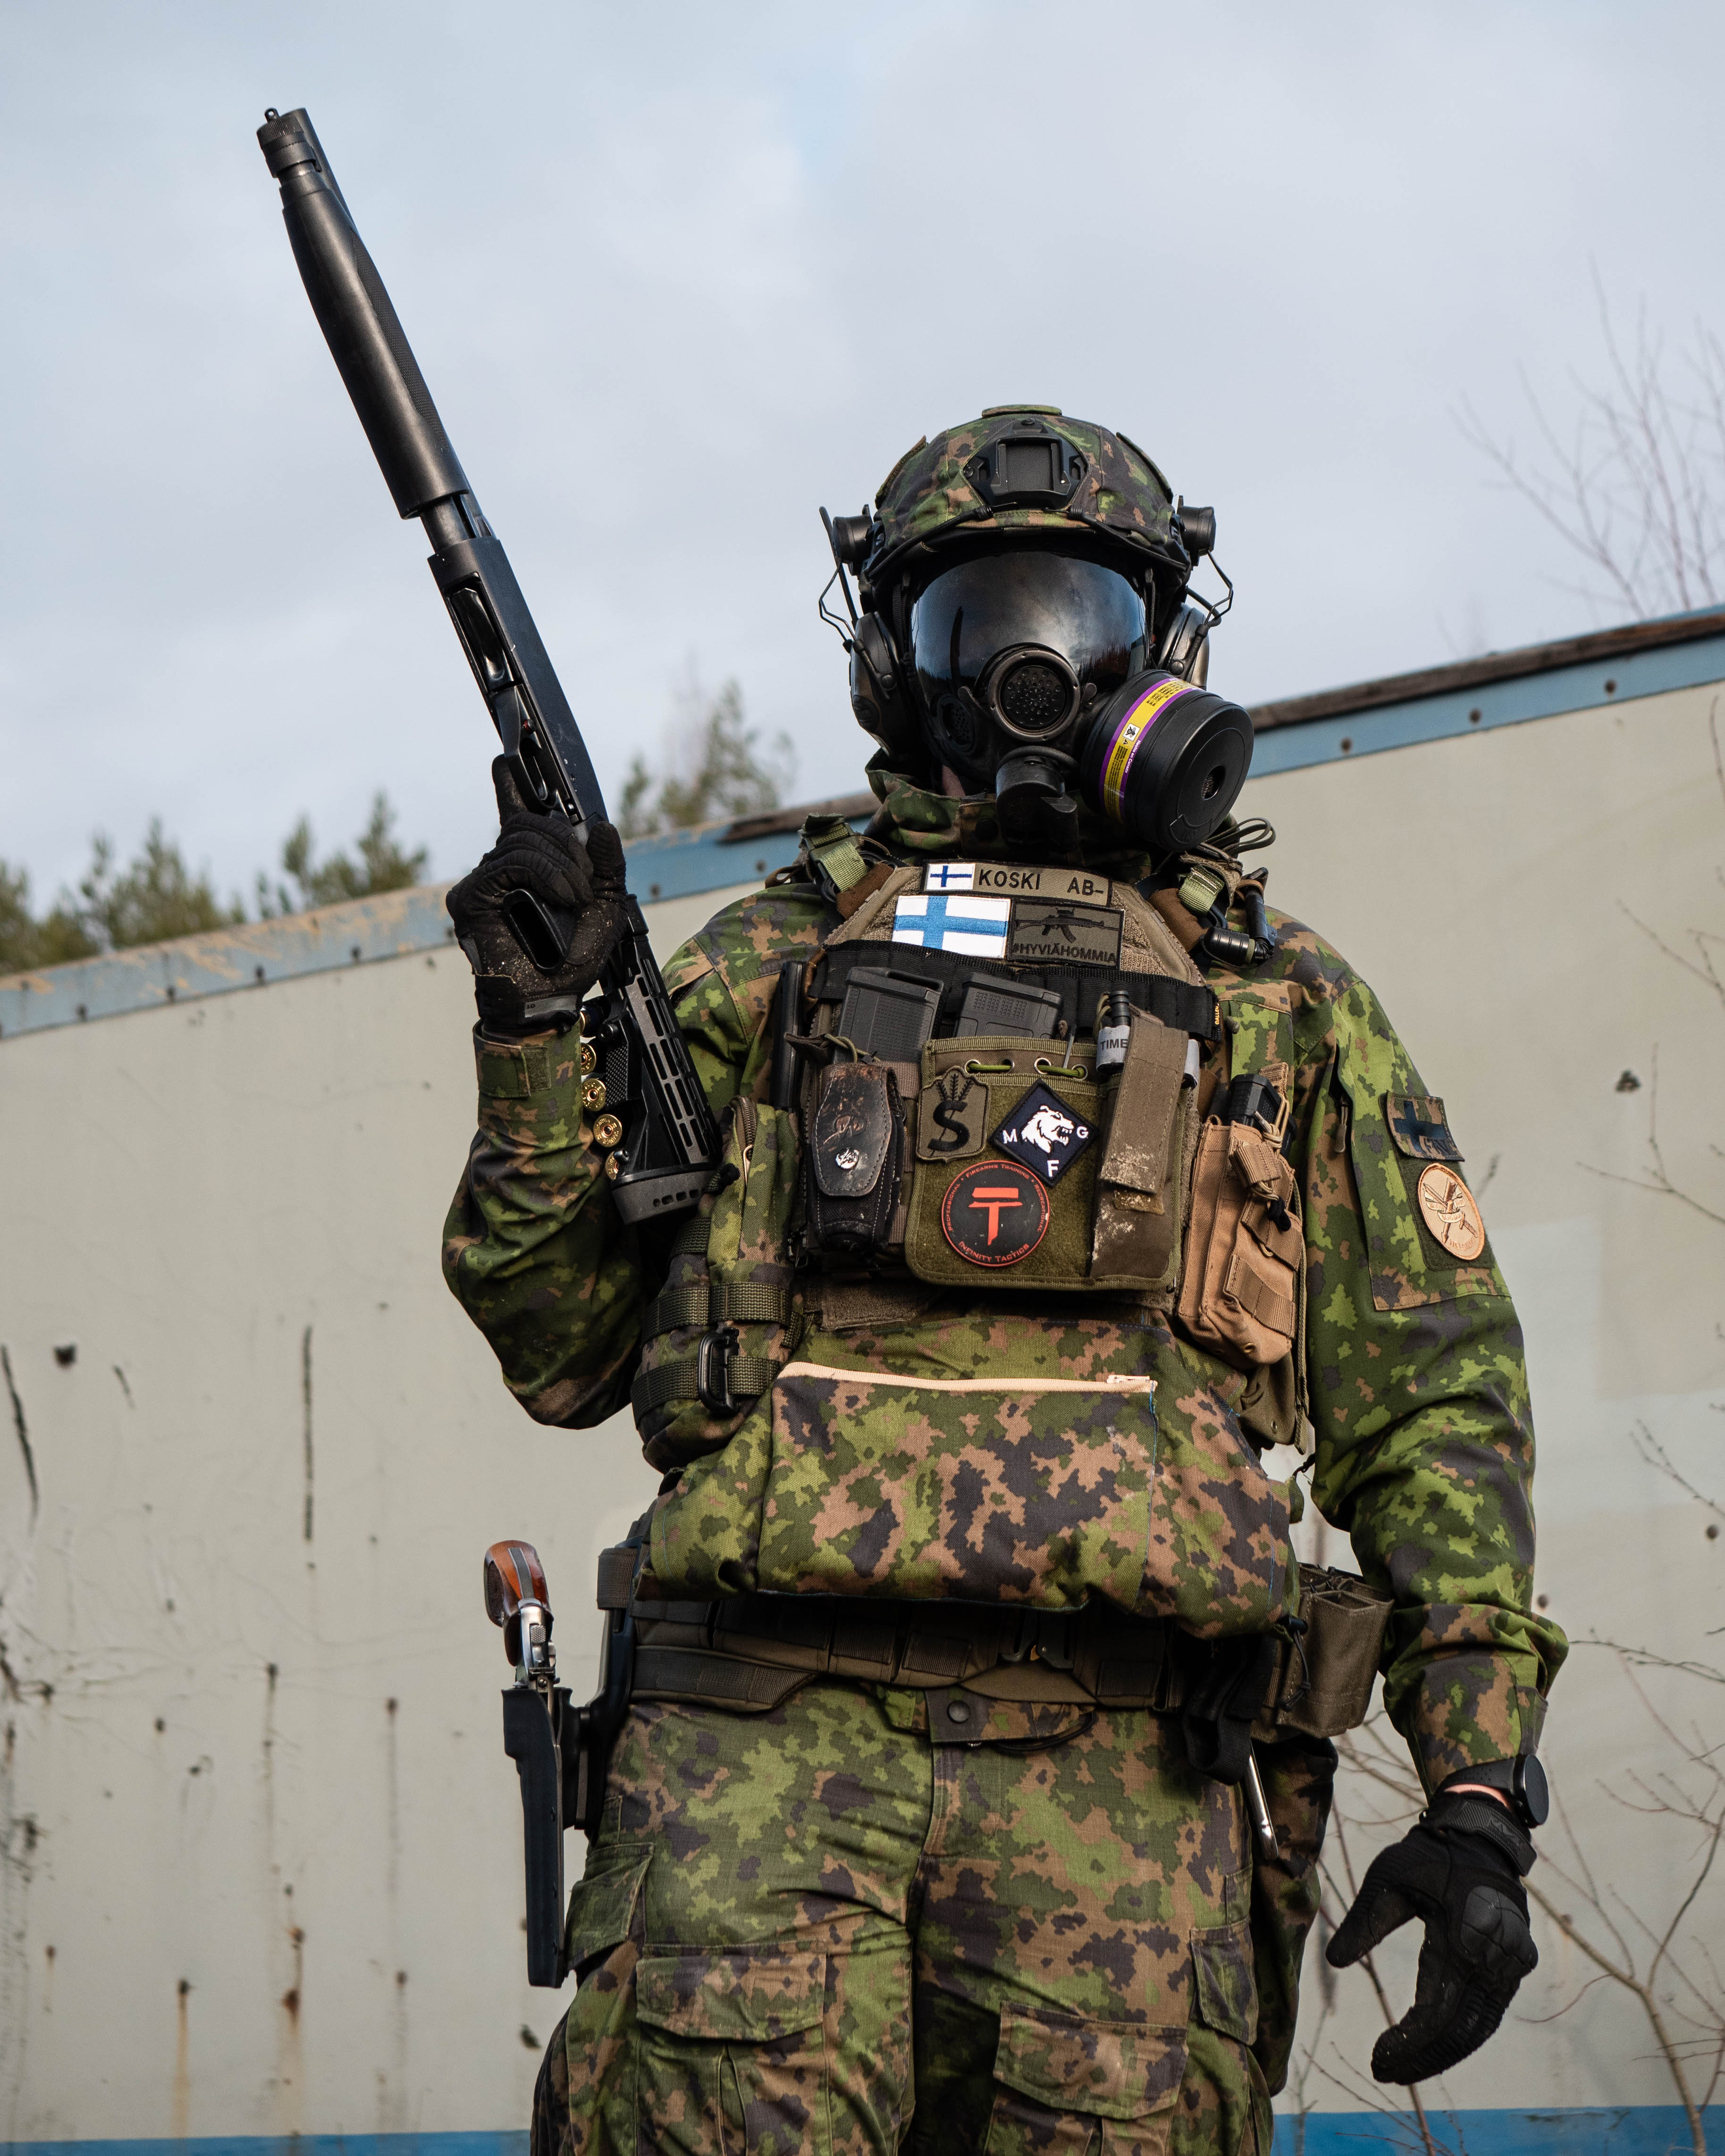 Man in army uniform and with a gas mask is standing infront of a container. He has a shotgun.